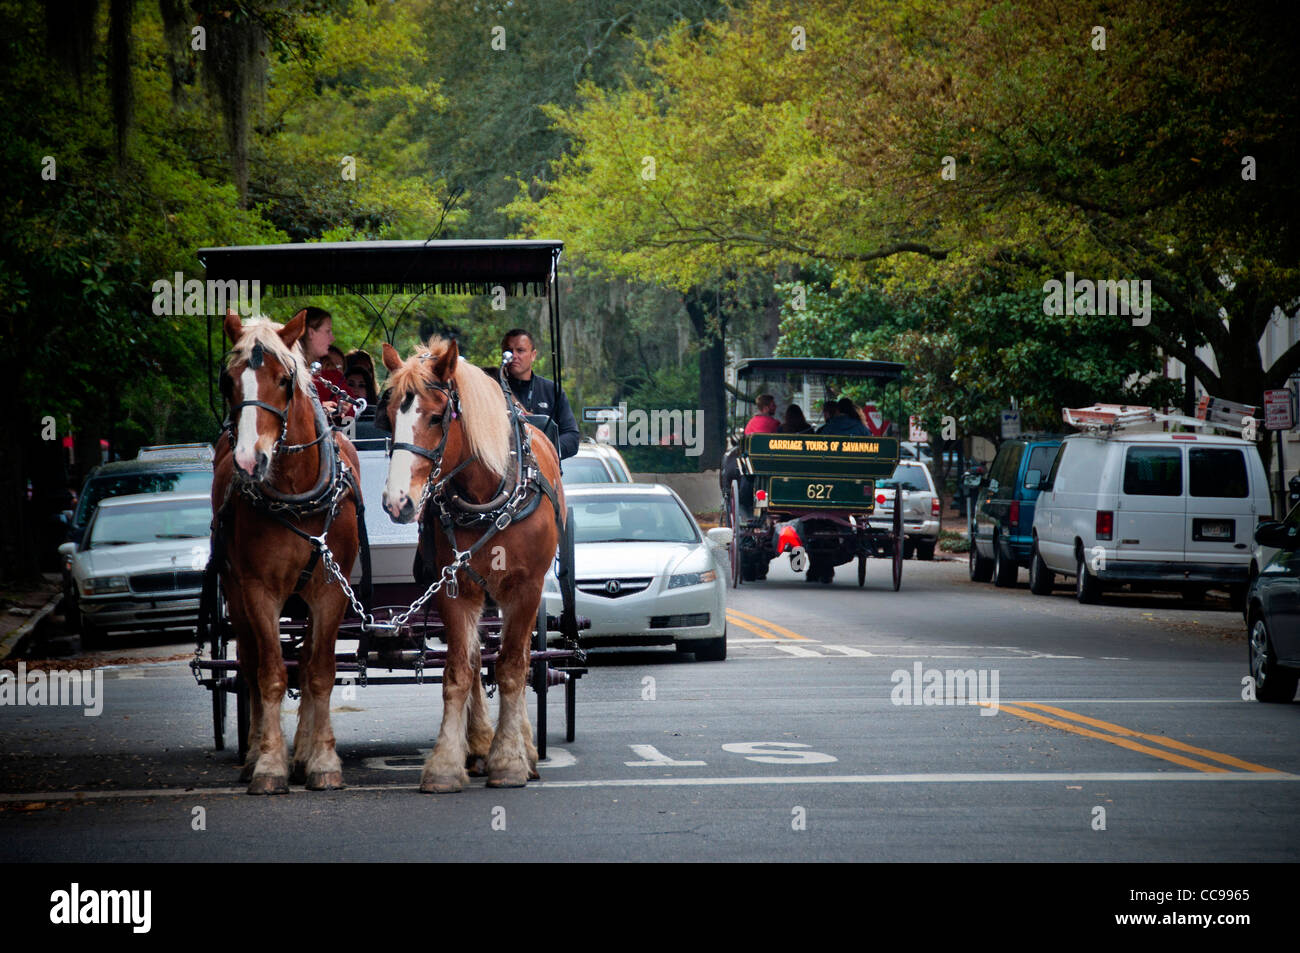 Tourists being shown around The Historic District in Savannah Georgia USA from a horse-drawn carriage Stock Photo